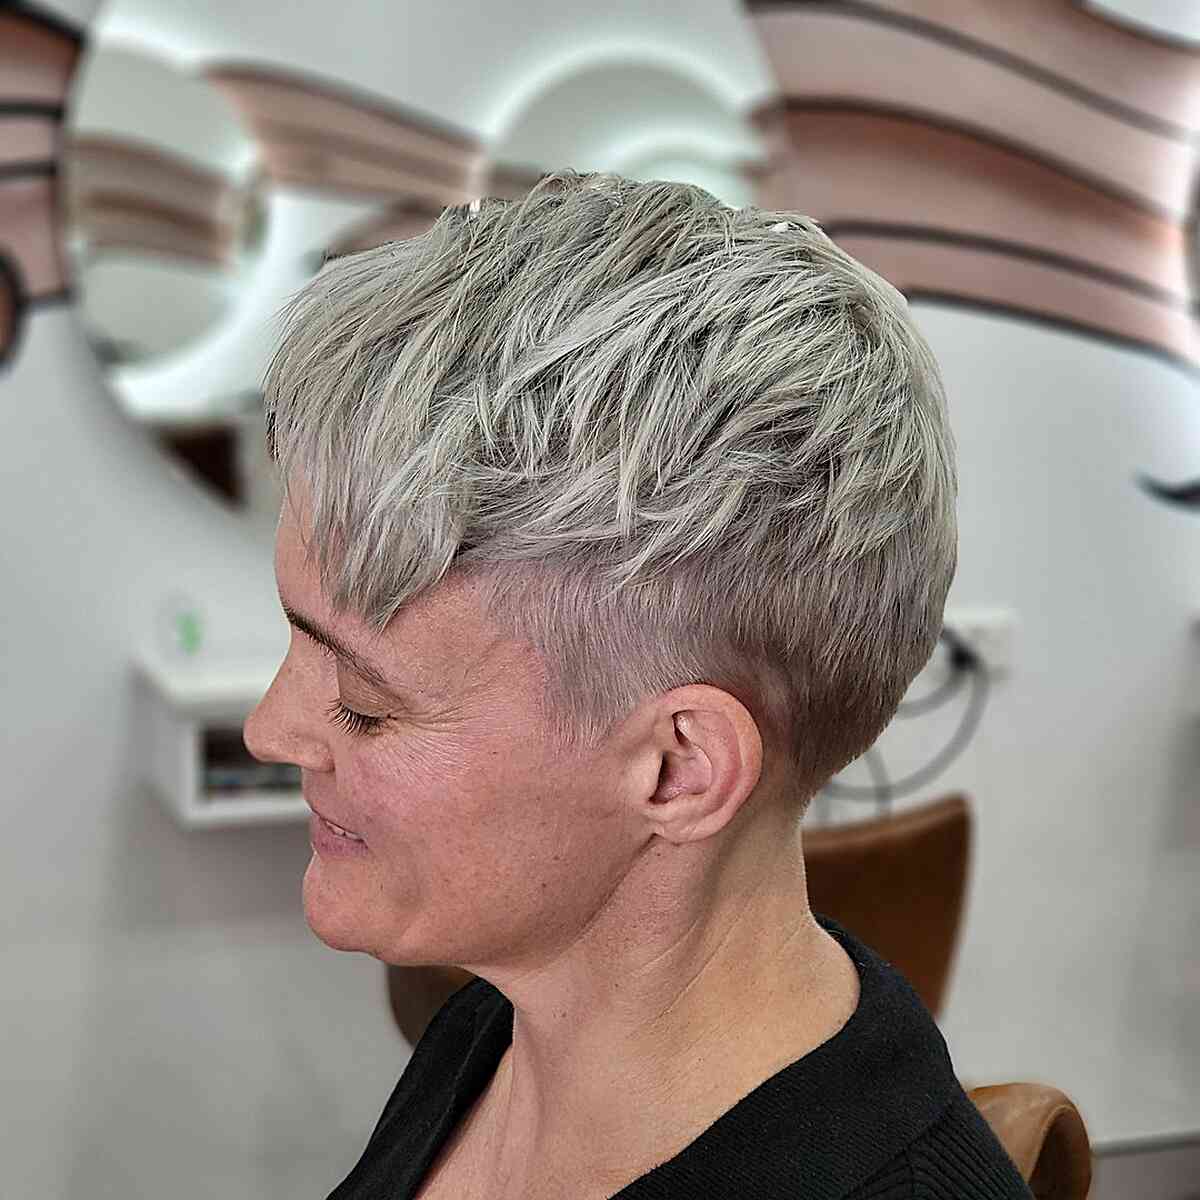 Choppy Cropped Pixie Undercut for Mature Ladies Aged 70